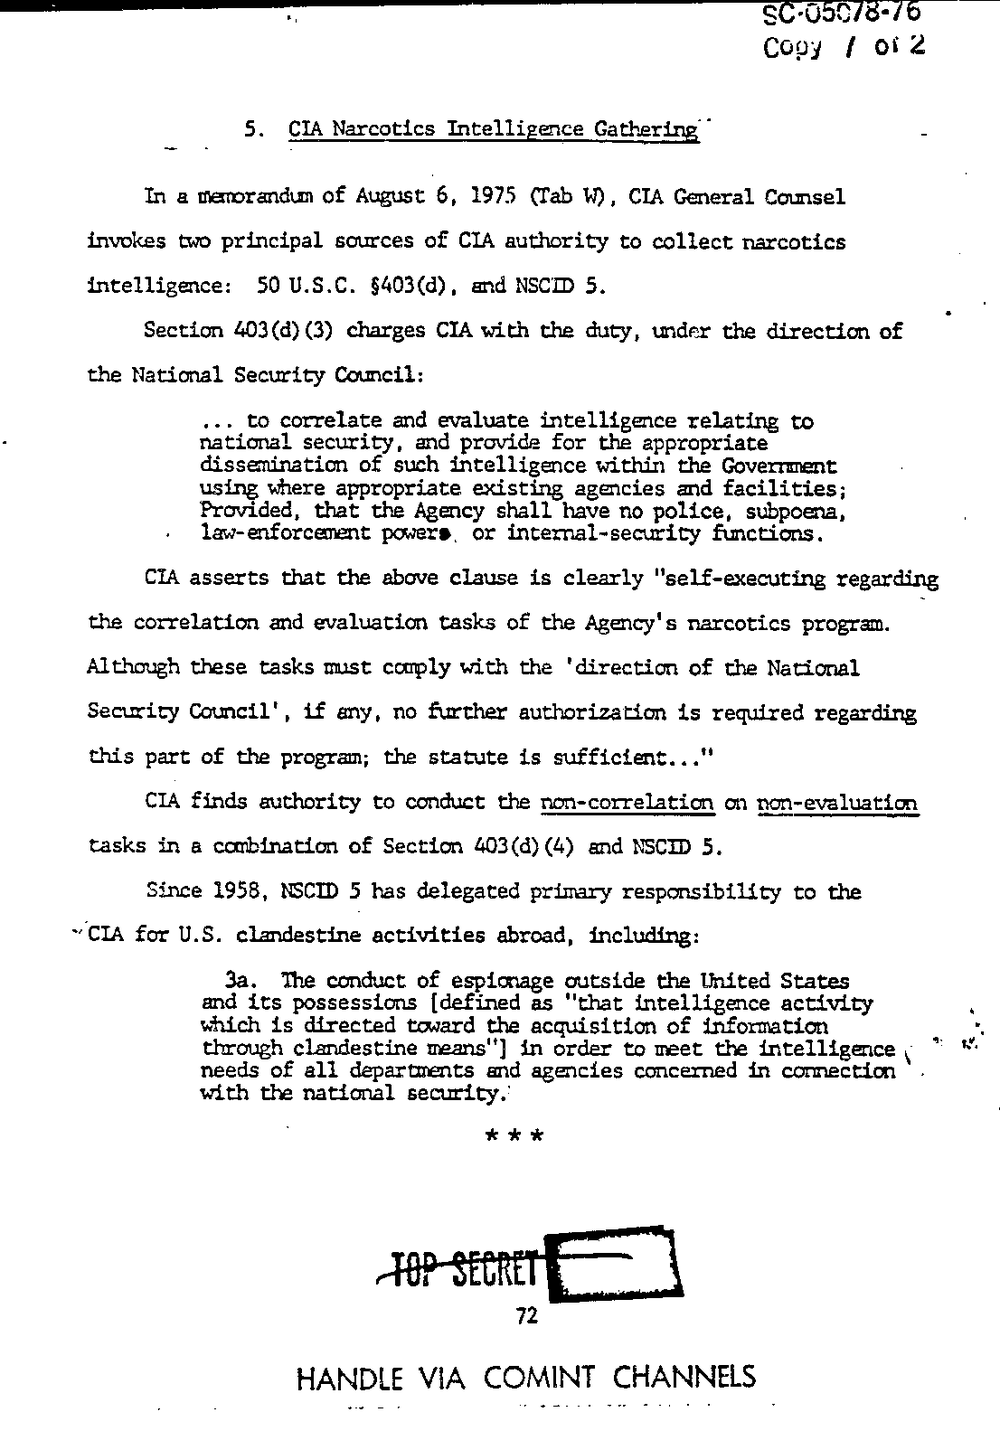 Page 80 from Report on Inquiry Into CIA Related Electronic Surveillance Activities